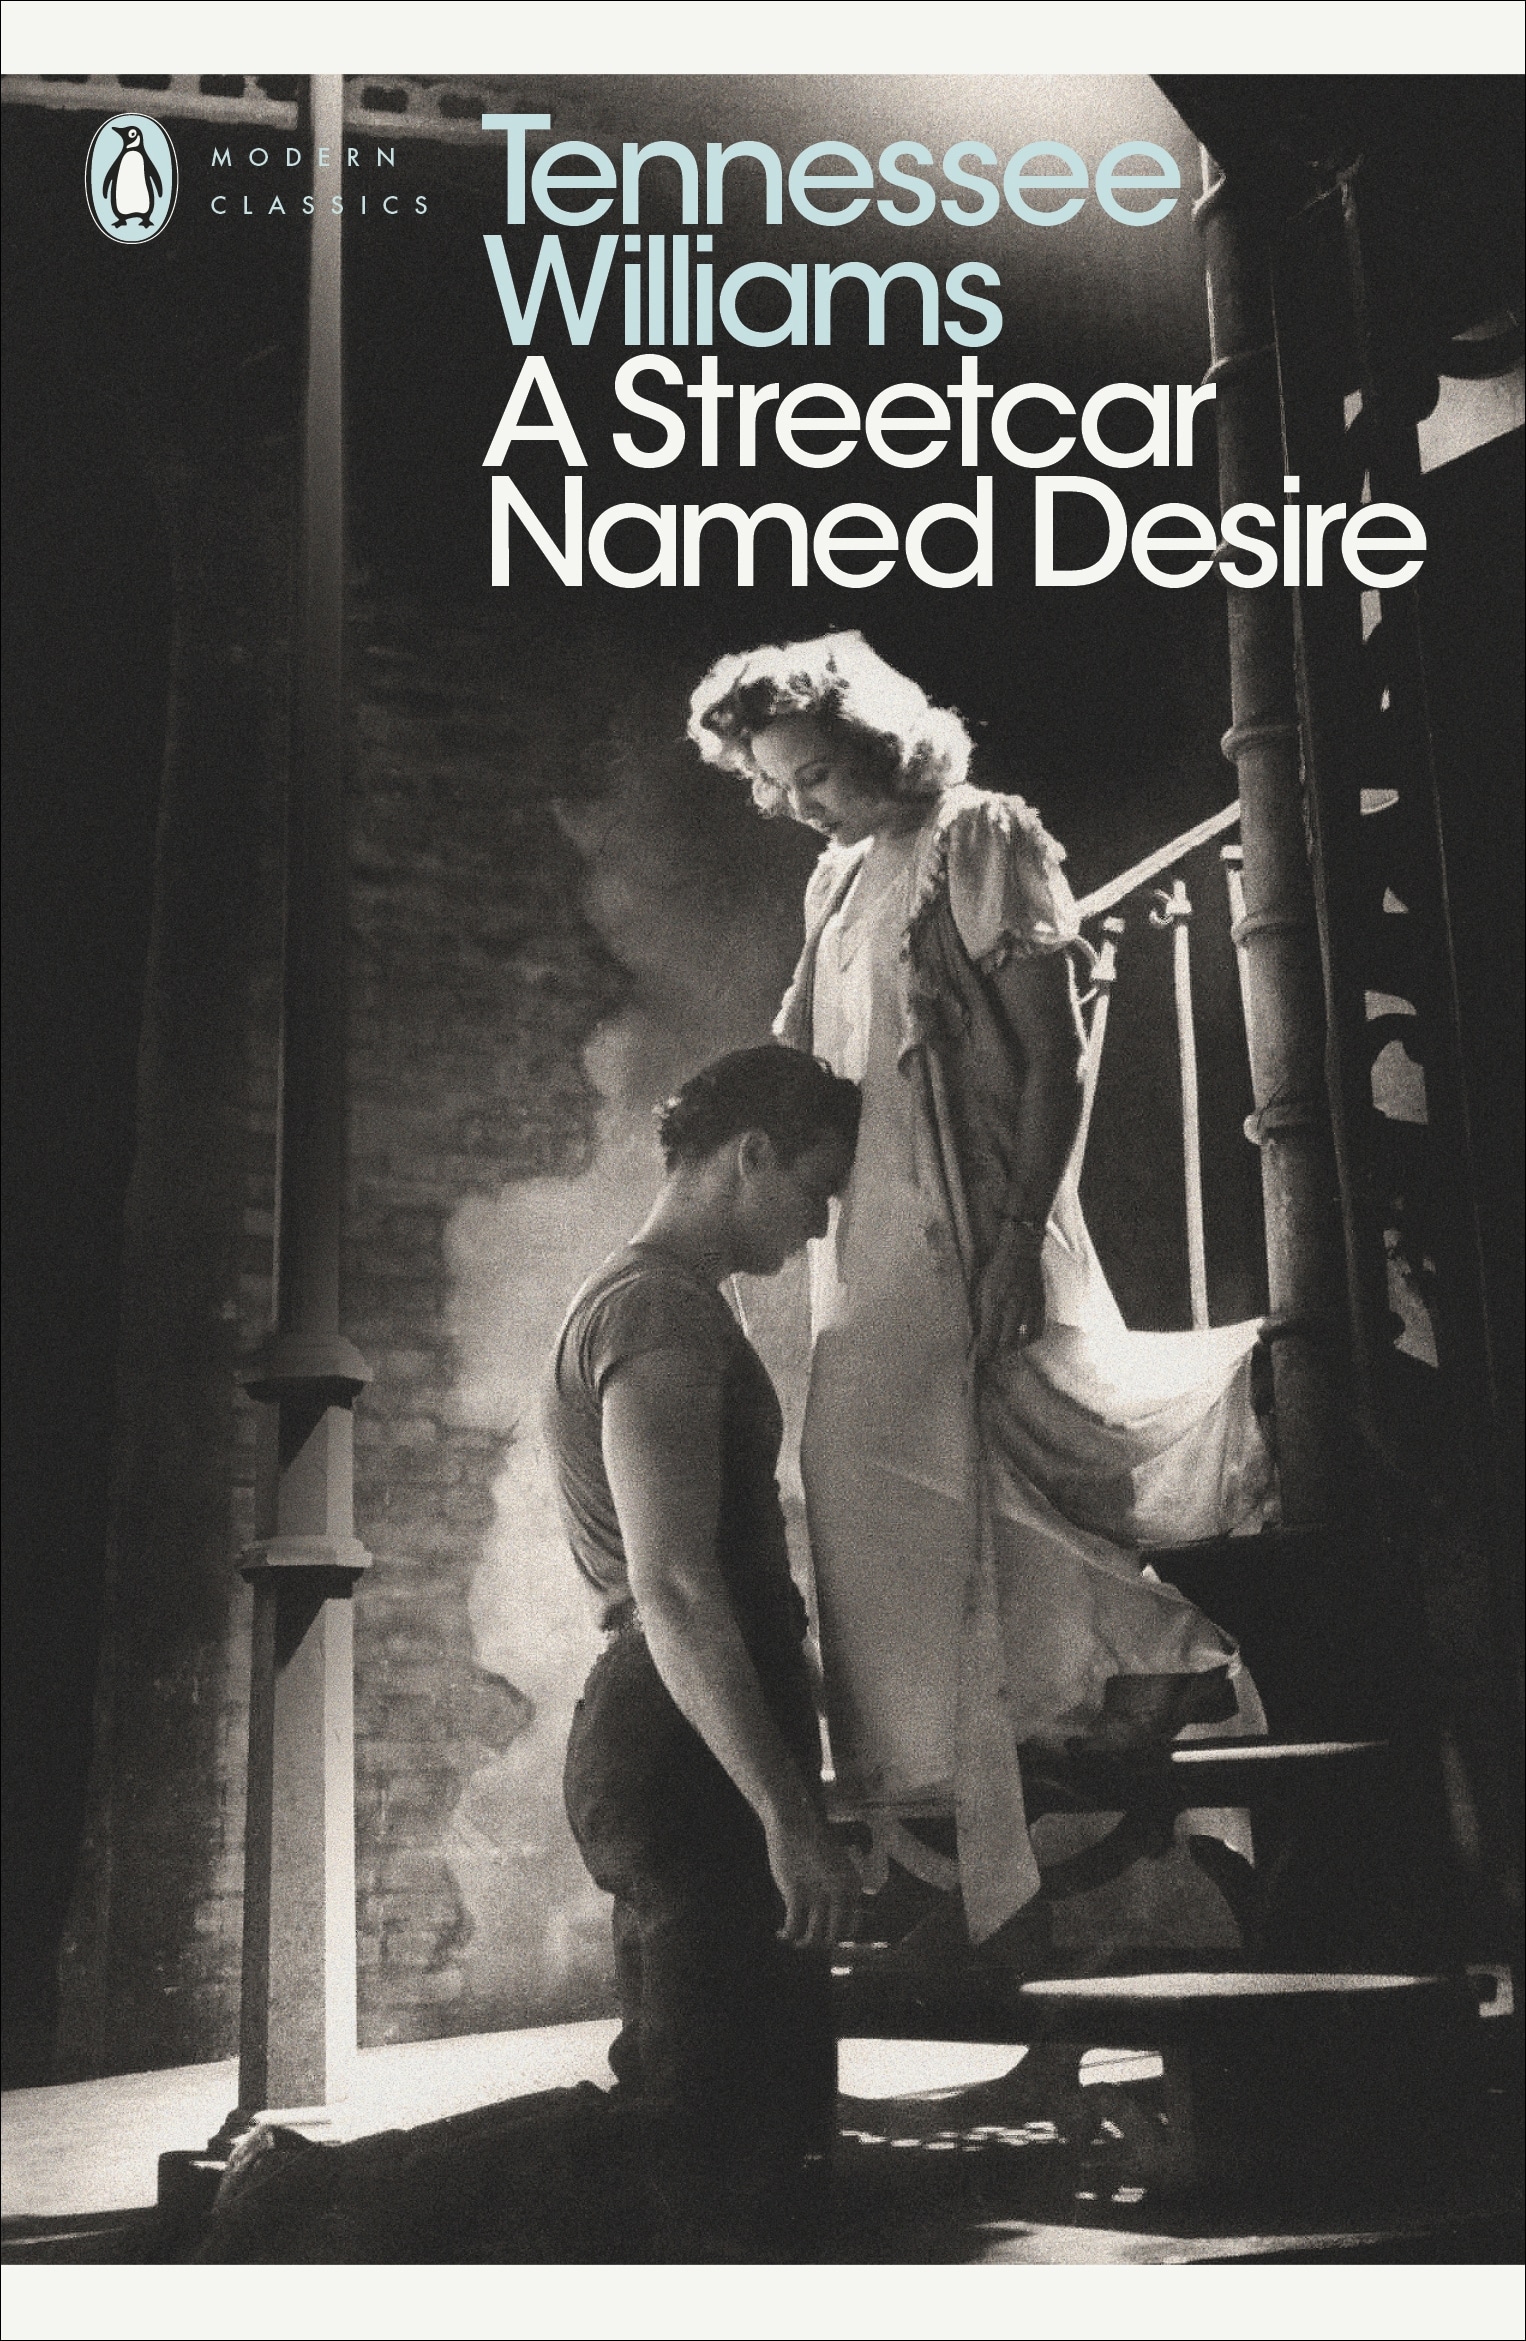 Book “A Streetcar Named Desire” by Tennessee Williams — March 5, 2009